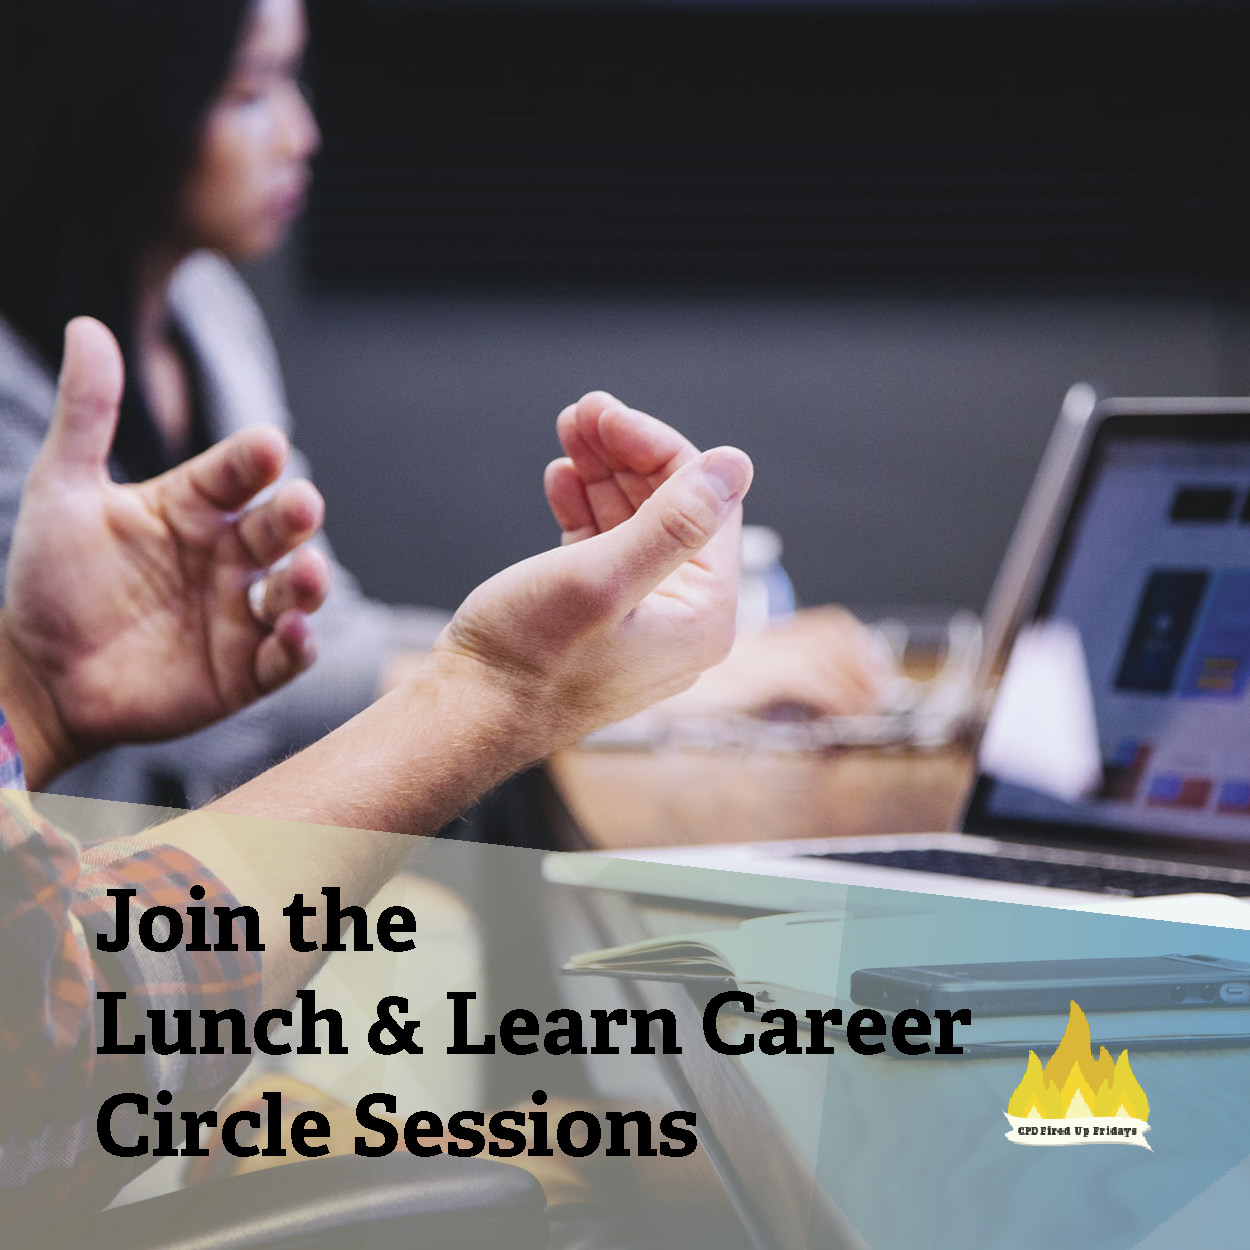 A pair of hands gestures, as if the owner of the hands is speaking, in the foreground. Behind the hands, an open laptop sits on a desk, and a young woman leans forward listening. Underneath, text reads: 'Join the Lunch and Learn Career Circle Sessions.'